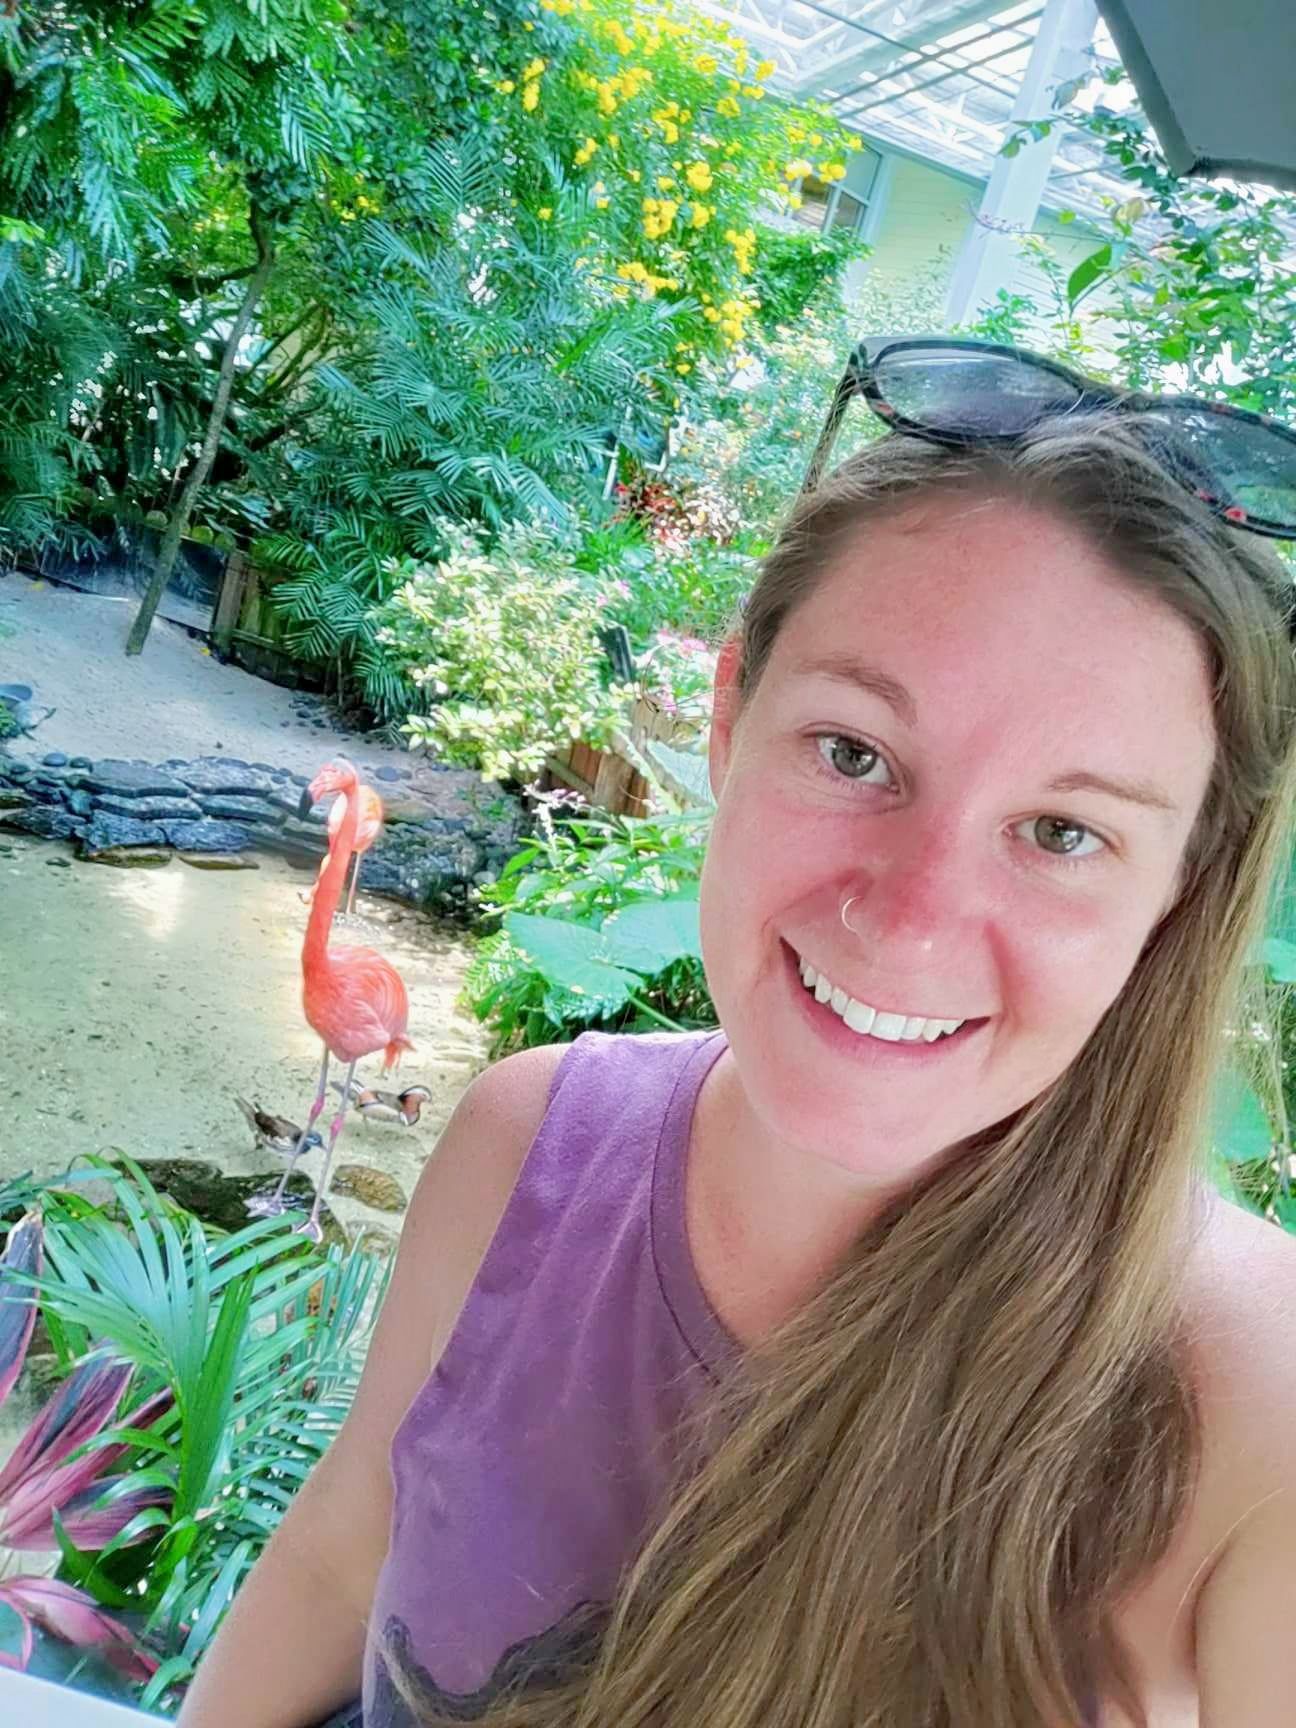 Ariel, a mental health intern, stands with a  a colorful flamingo in the background, symbolizing tranquility and renewal.